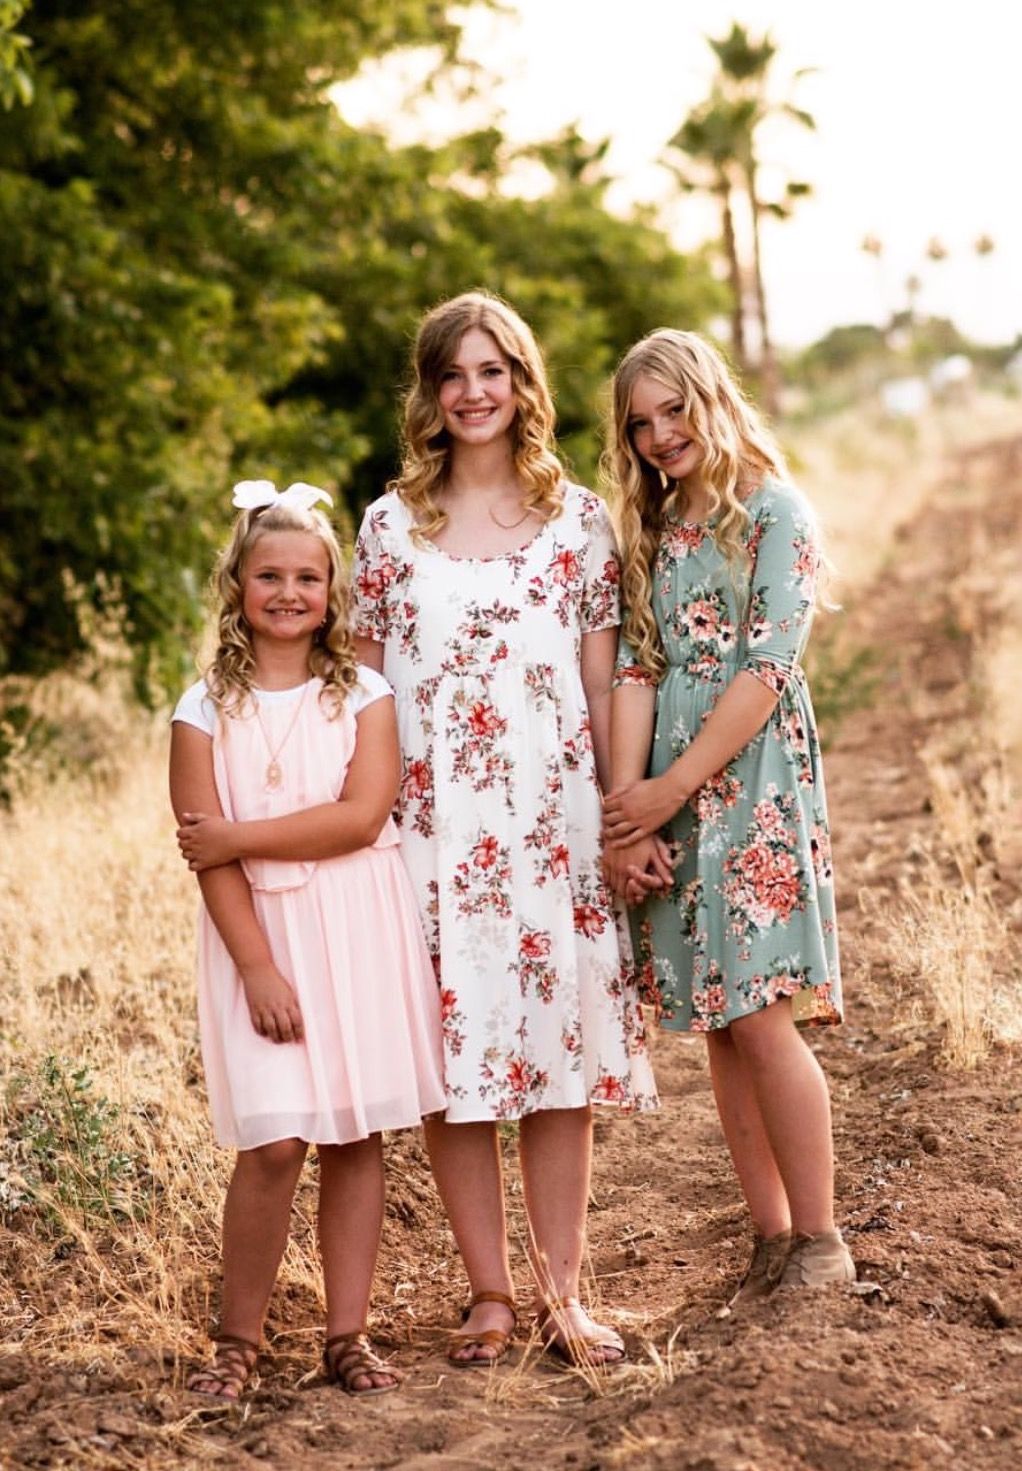 Floral-Patterns. 70+ Best Chosen Family Photo Outfit Ideas in Summer 2022